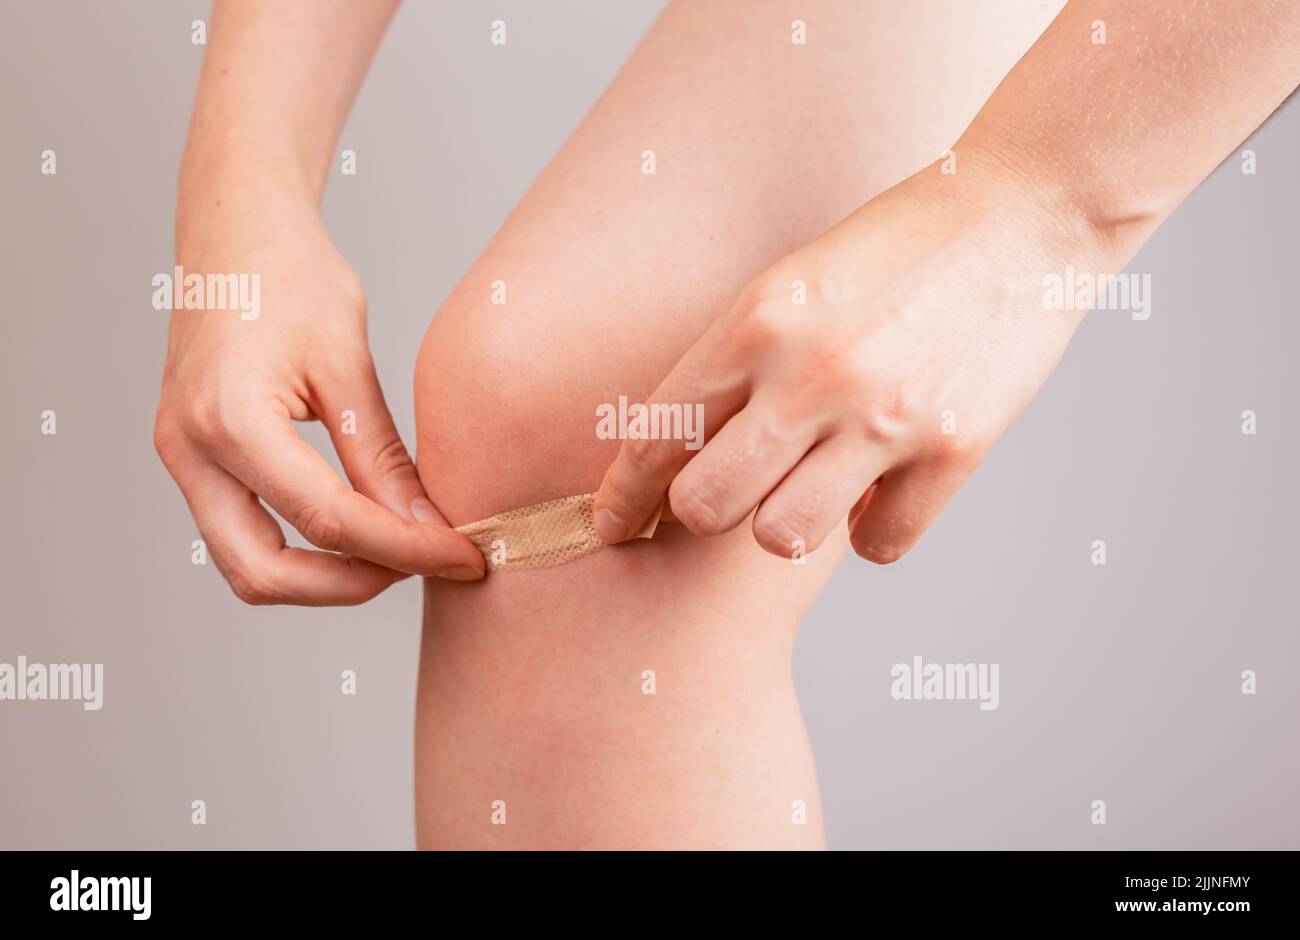 Woman applying medical plaster on knee. First aid concept. Cuts, abrasions and lightly bleeding wounds healing. Health care. Female leg closeup. High quality photo Stock Photo